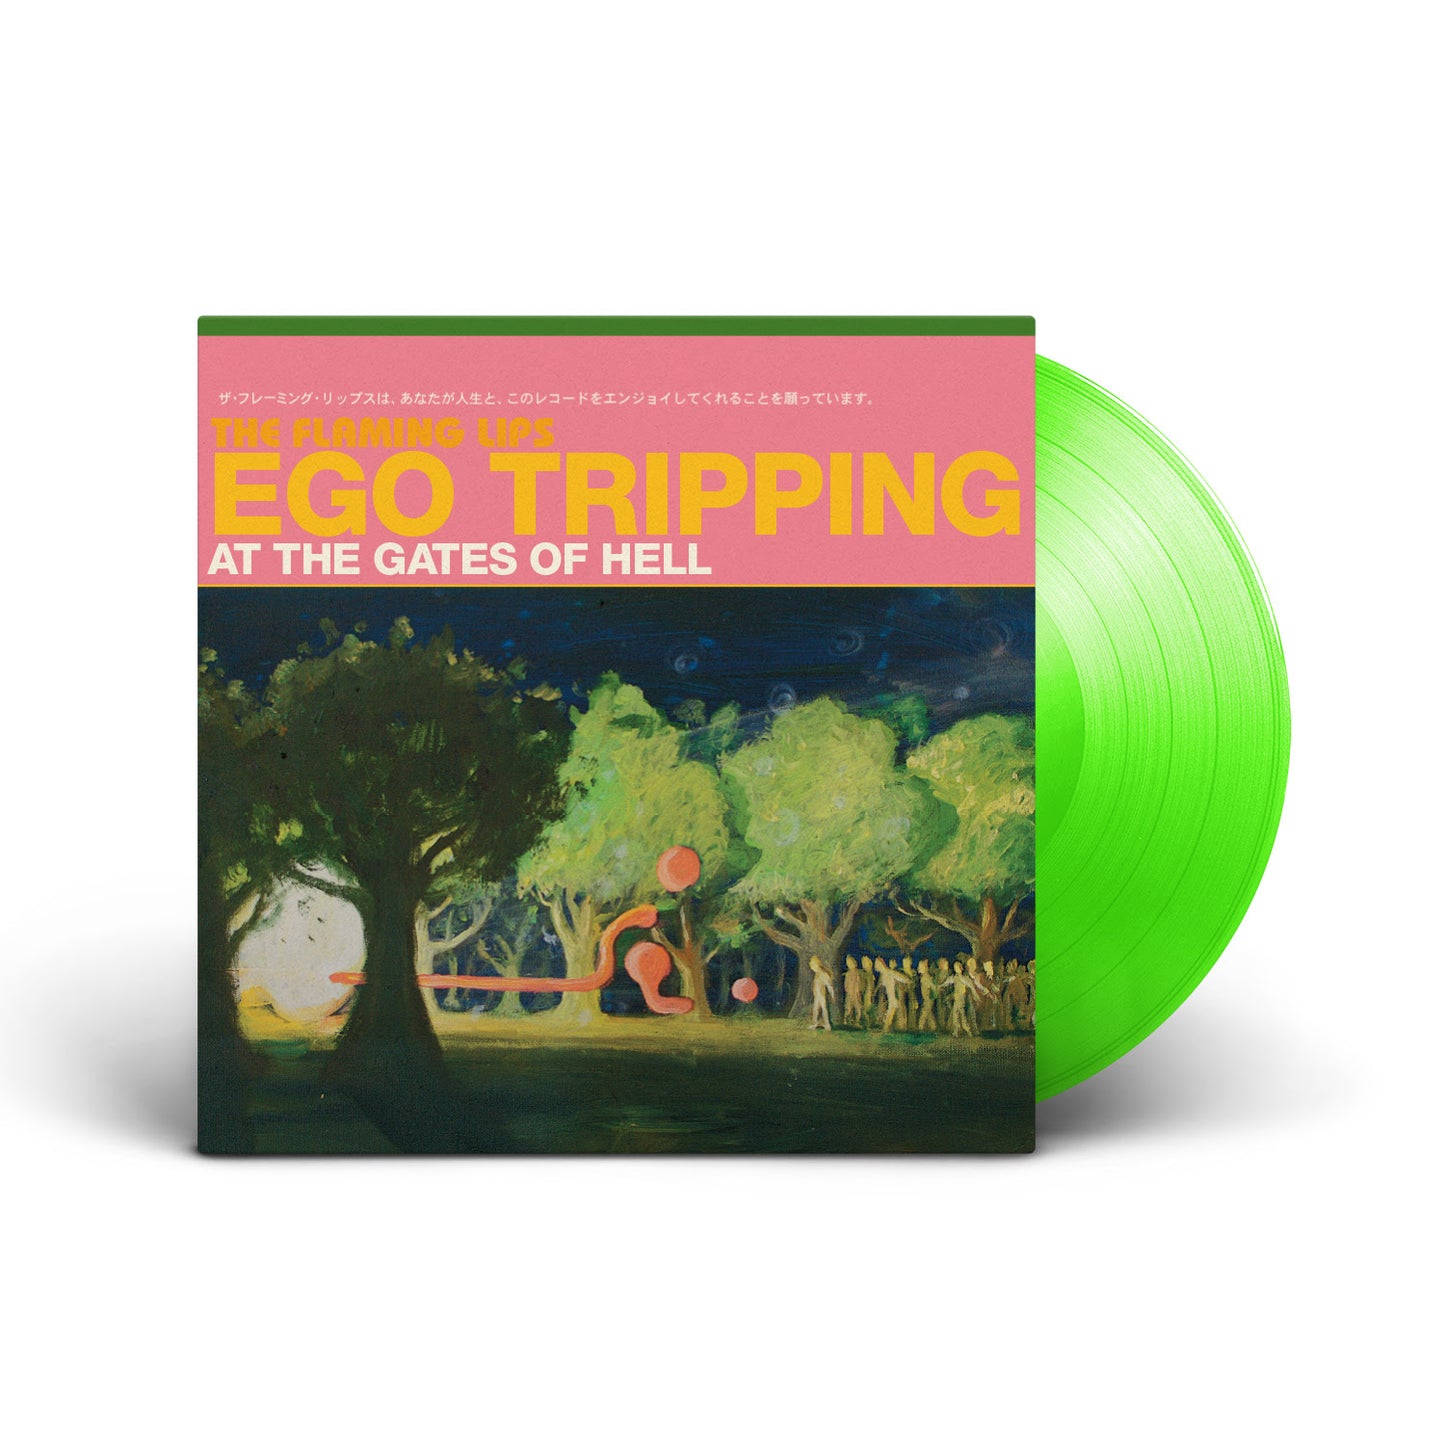 The Flaming Lips – Ego Tripping At The Gates Of Hell | Buy the Vinyl LP from Flying Nun Records